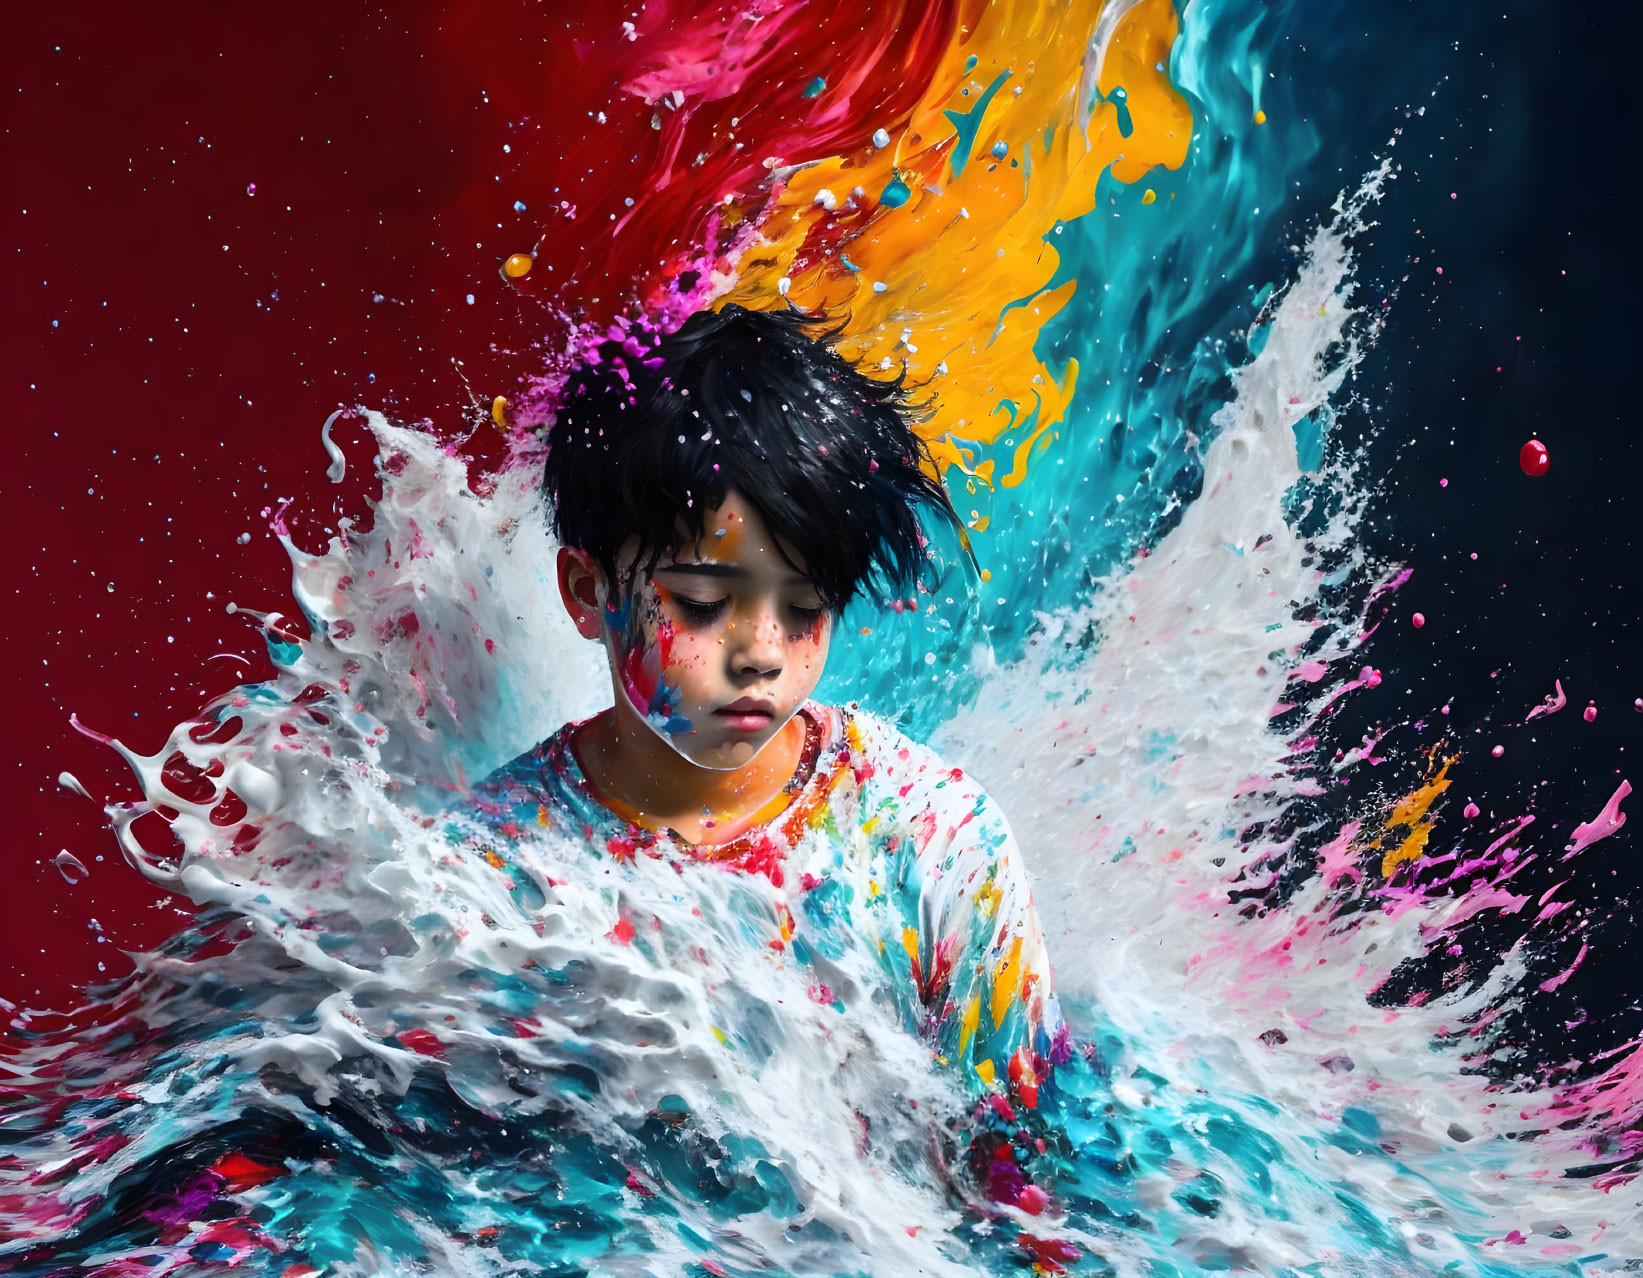 Paint-splattered person surrounded by vibrant colors on dark background